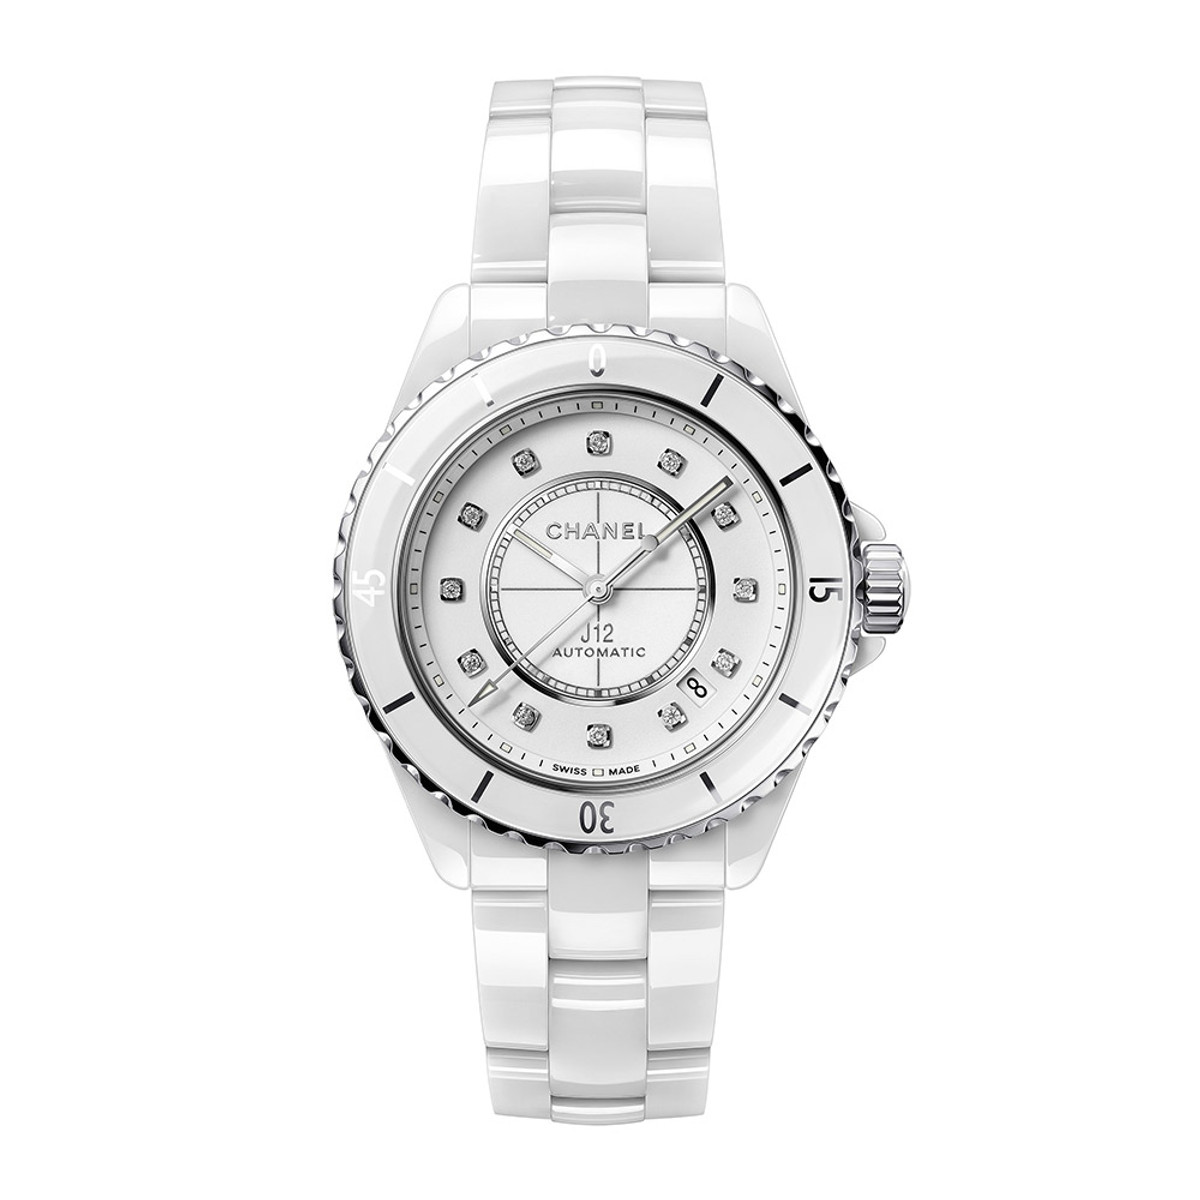 CHANEL J12 WATCH CALIBER 12.1, 38 MM-WCHNL0225 Product Image